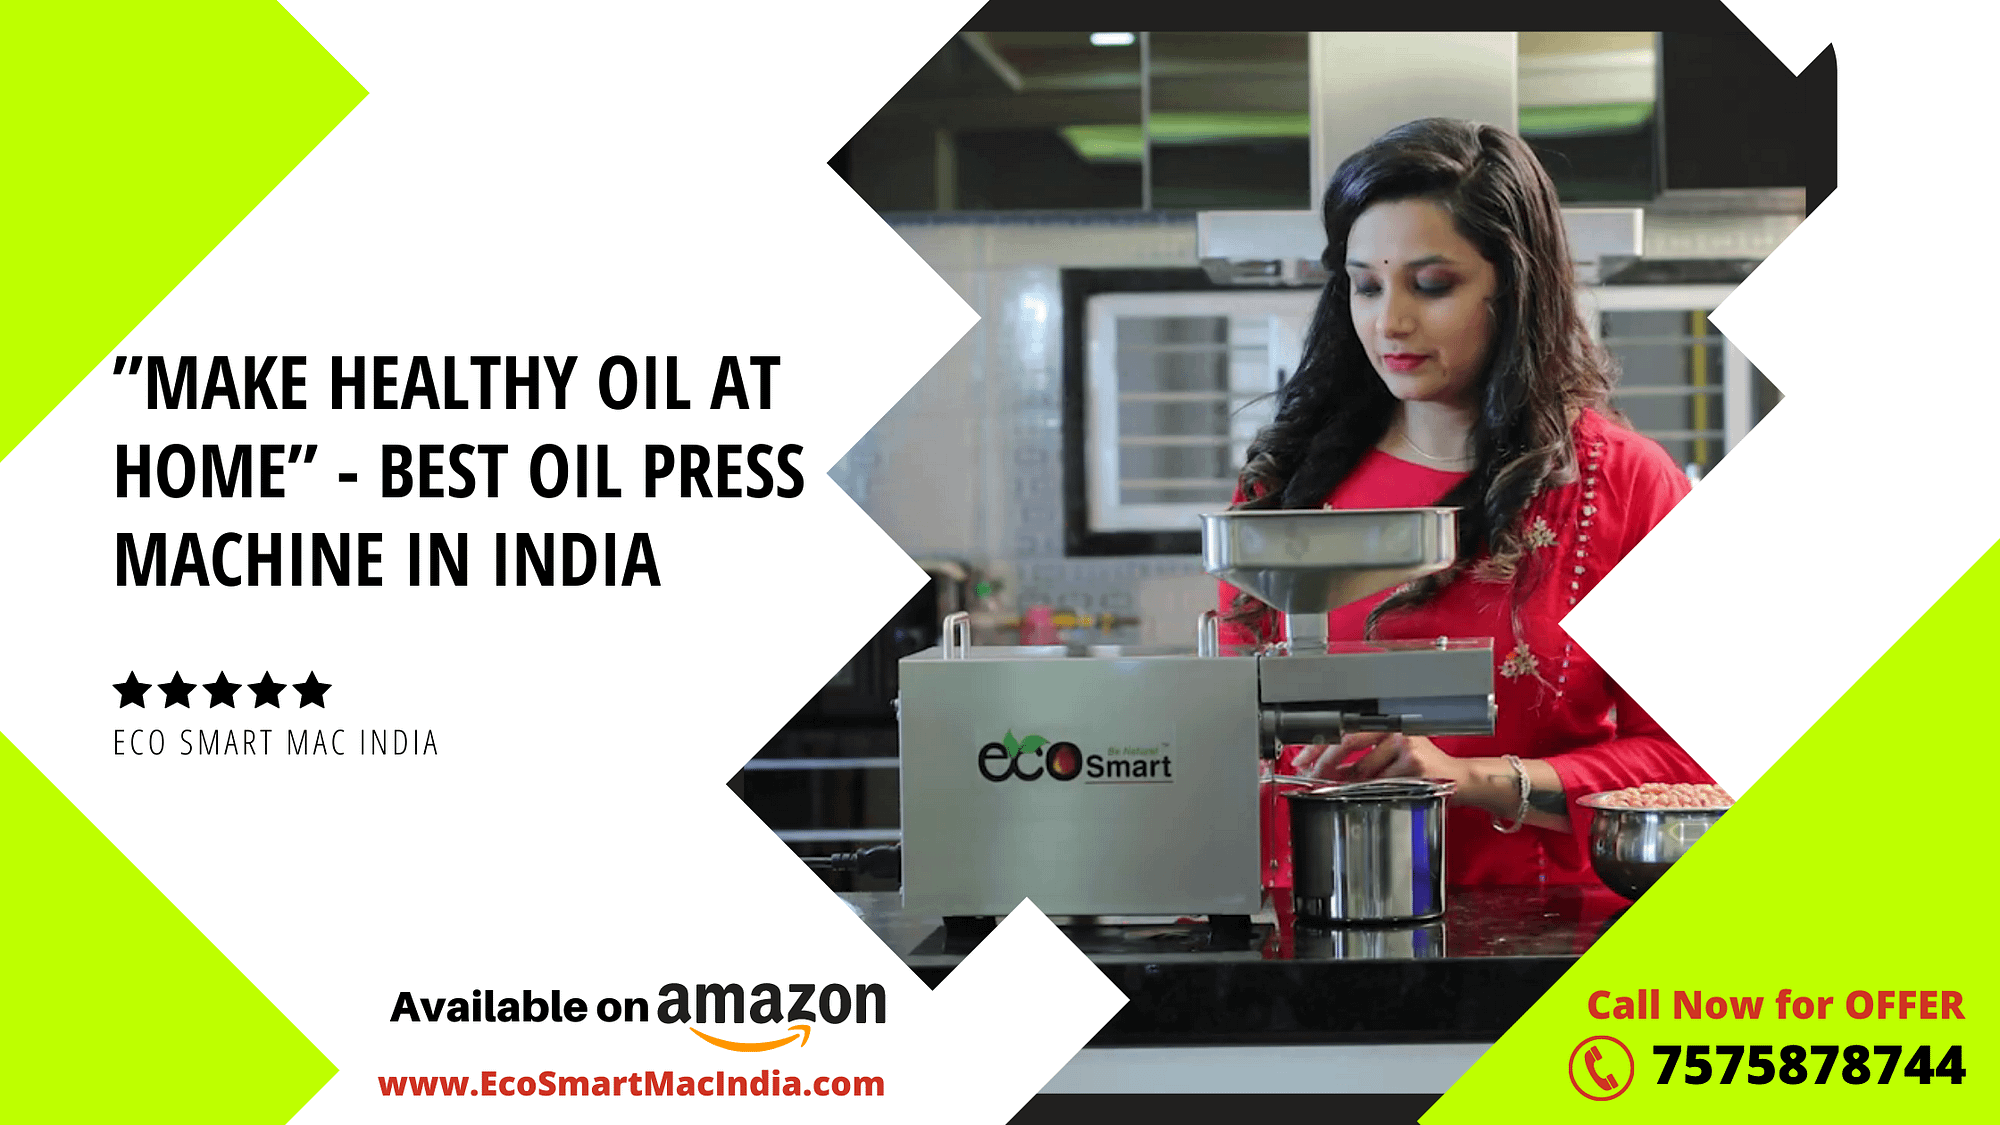 Best Oil Press Machine in India in 2021 at an affordable Lowest Price